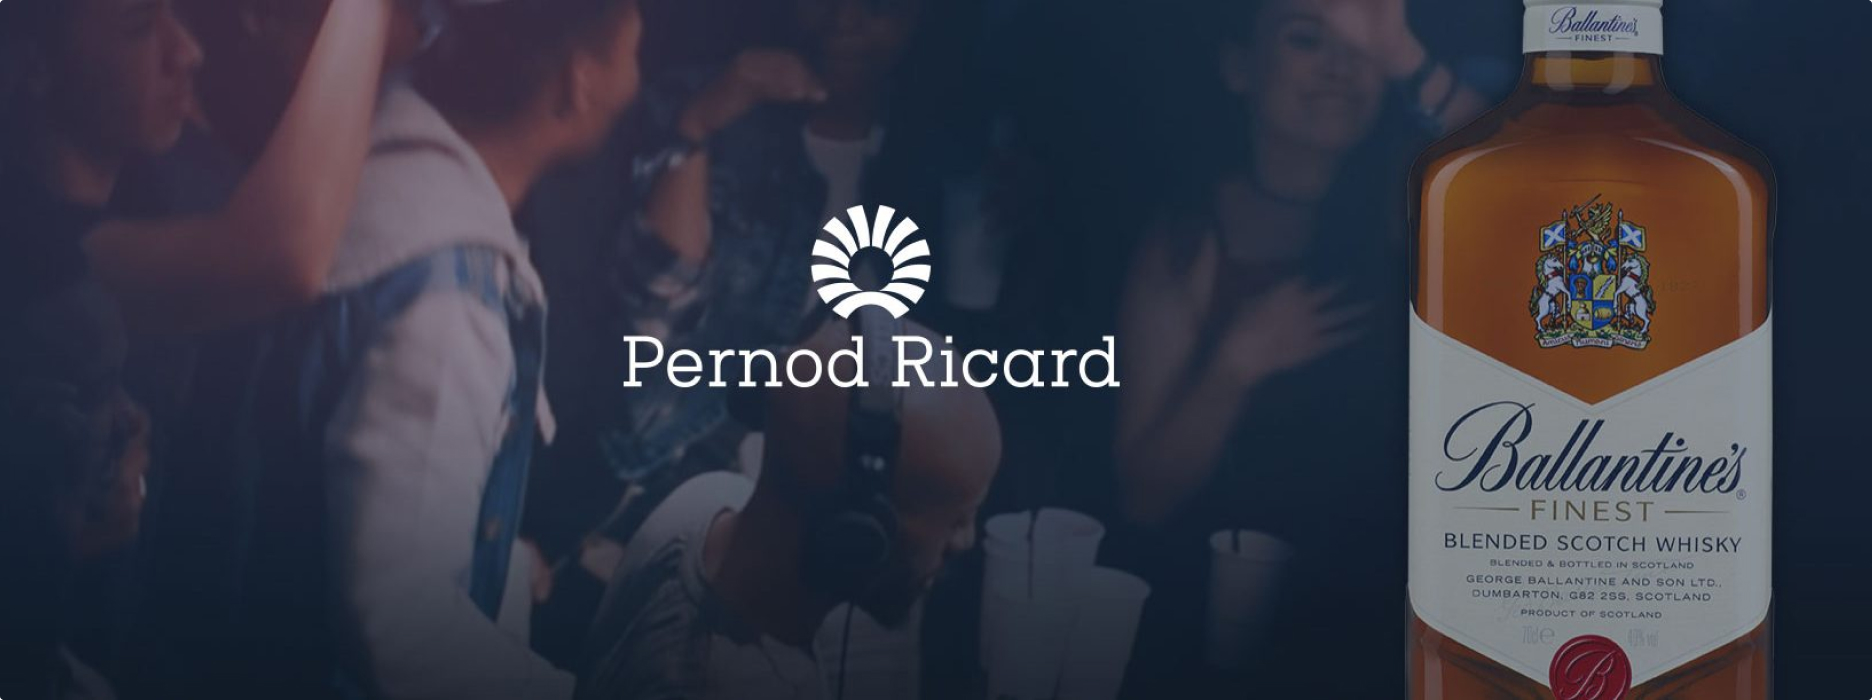 Pernod Ricard logo and bottle of Ballentine's Scotch whisky on an image background of people at a club 